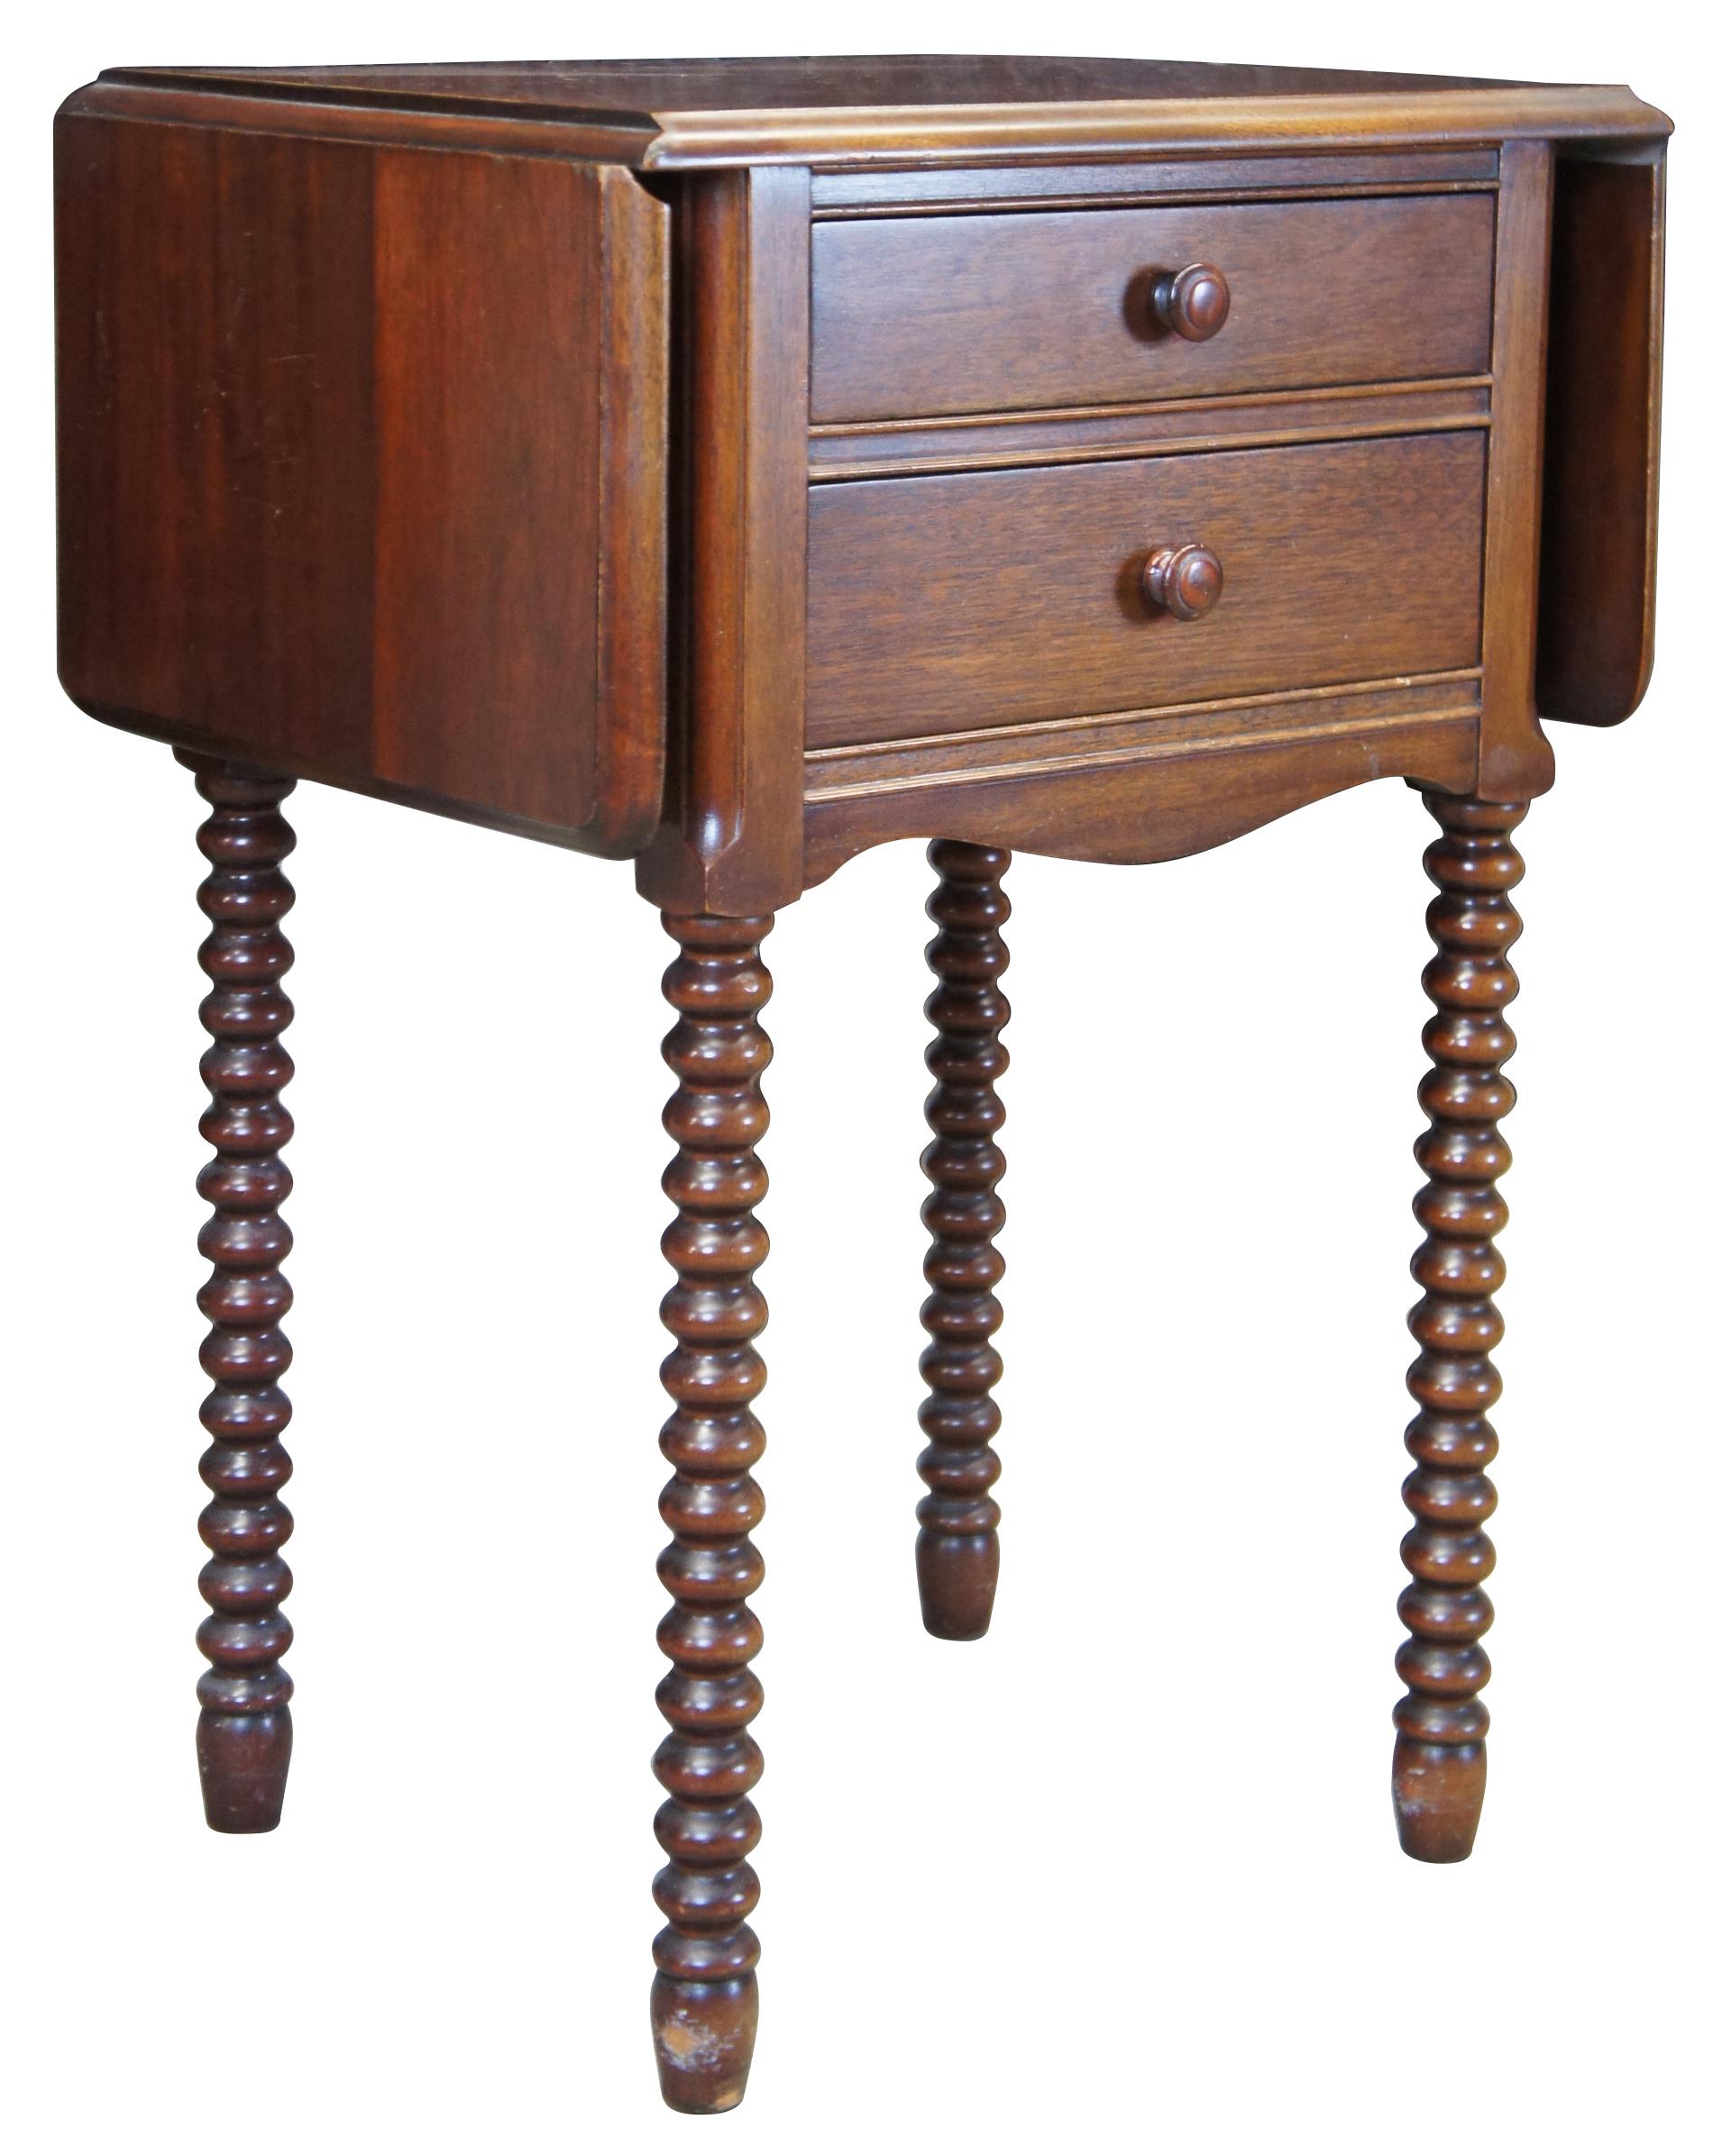 Mid-20th century Early American style drop-leaf side table. Made from mahogany with a cherry stain. Features two drawers and long ribbed / spool legs.
    
Leaves add 10